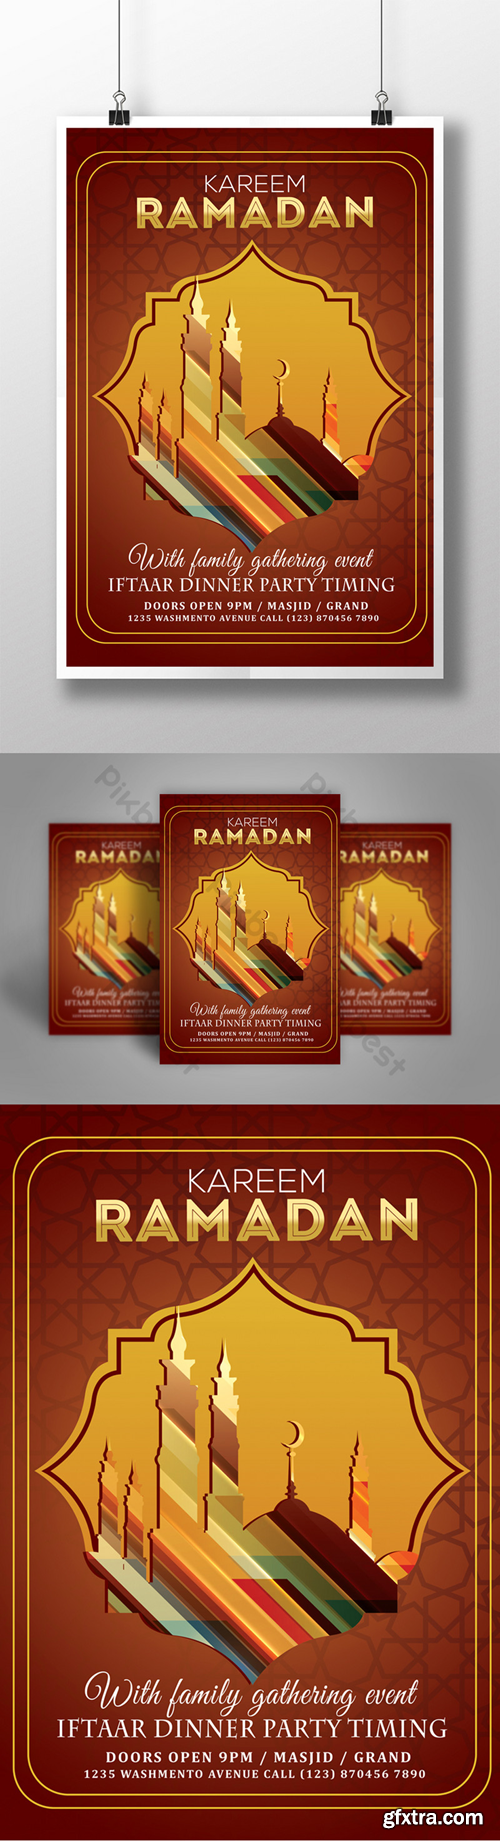 Ramadan Muslim Event with Centered Frame and Assorted Mosques in Silhouette Flyer Templates Template PSD